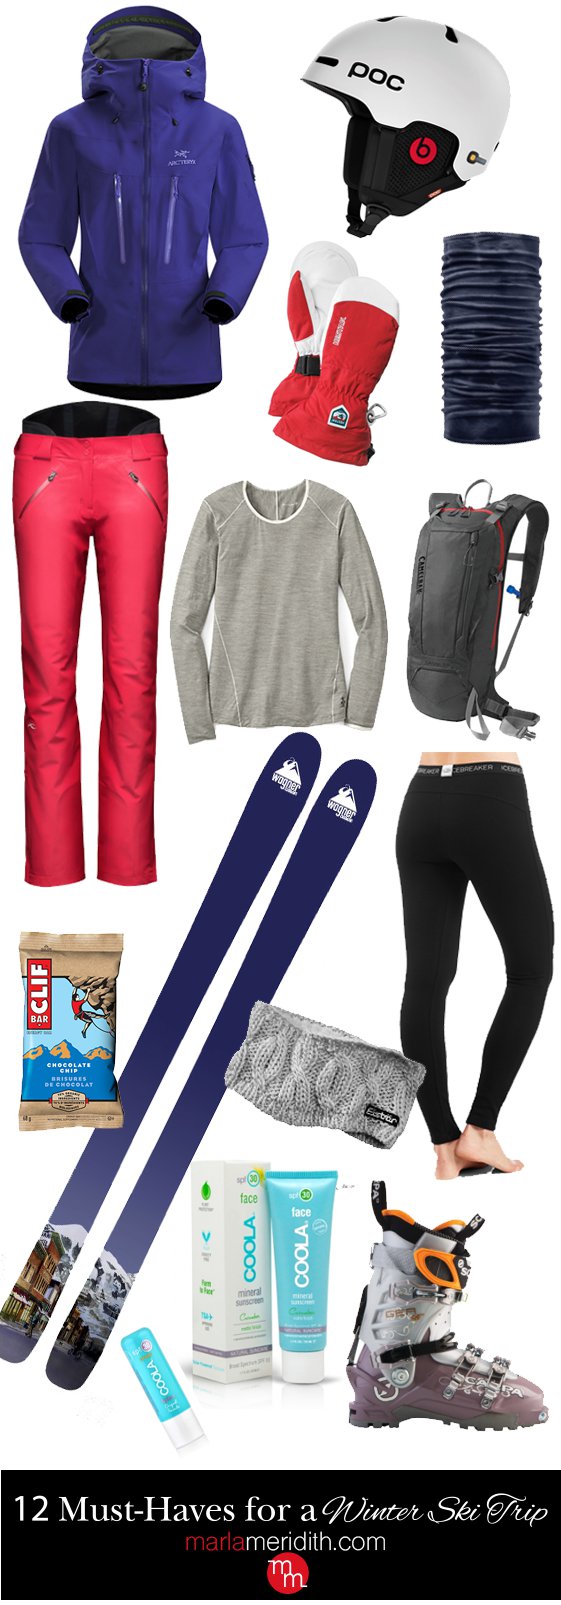 12 Must-Haves for a Winter Ski Trip. With these great items you will stay warm, dry, fashionable & HAPPY! MarlaMeridith.com ( @marlameridith ) 